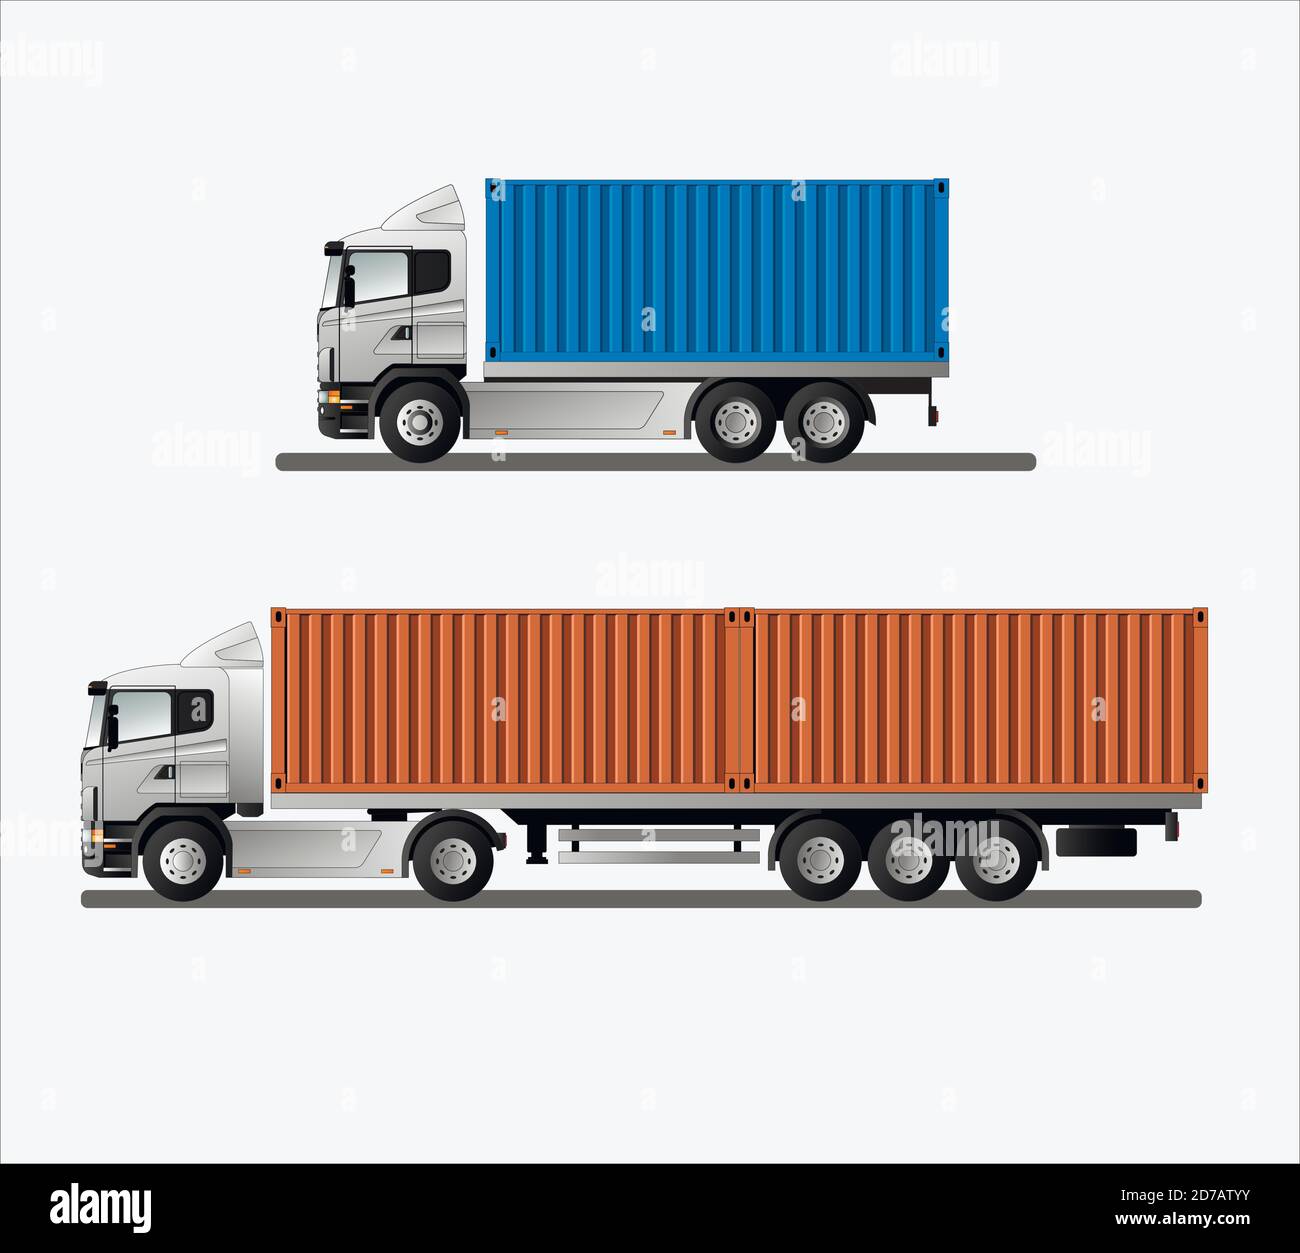 Truck options for shipping containers. Trucks for the delivery of goods. Vector Stock Vector